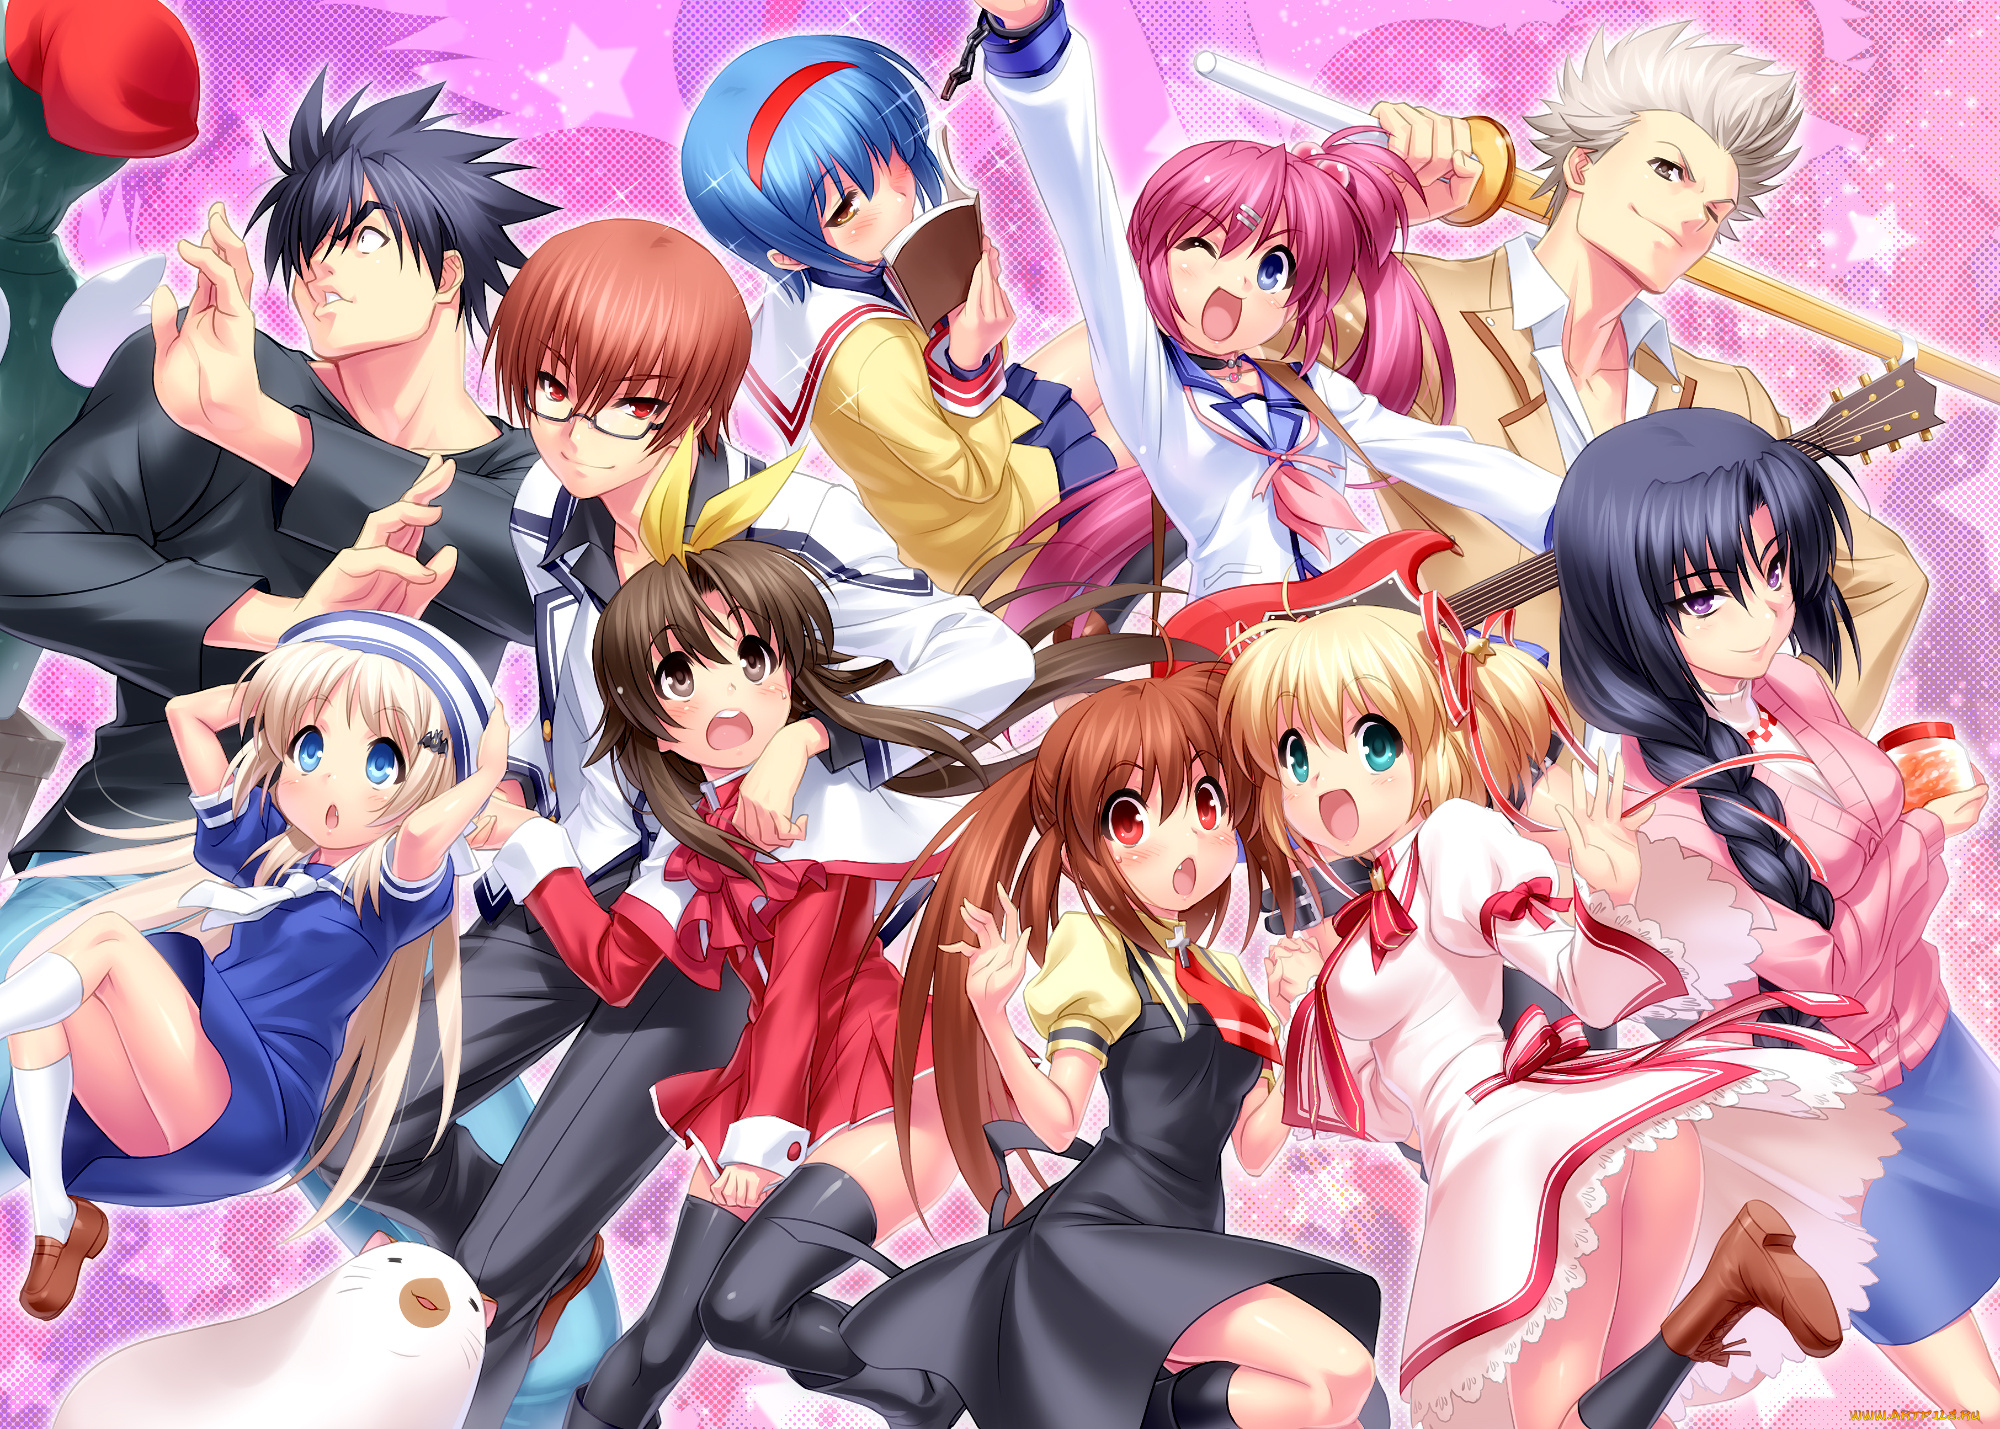 аниме, *unknown, , другое, rewrite, разное, арт, парни, девушки, little, busters, kanon, air, angel, beats, clannad